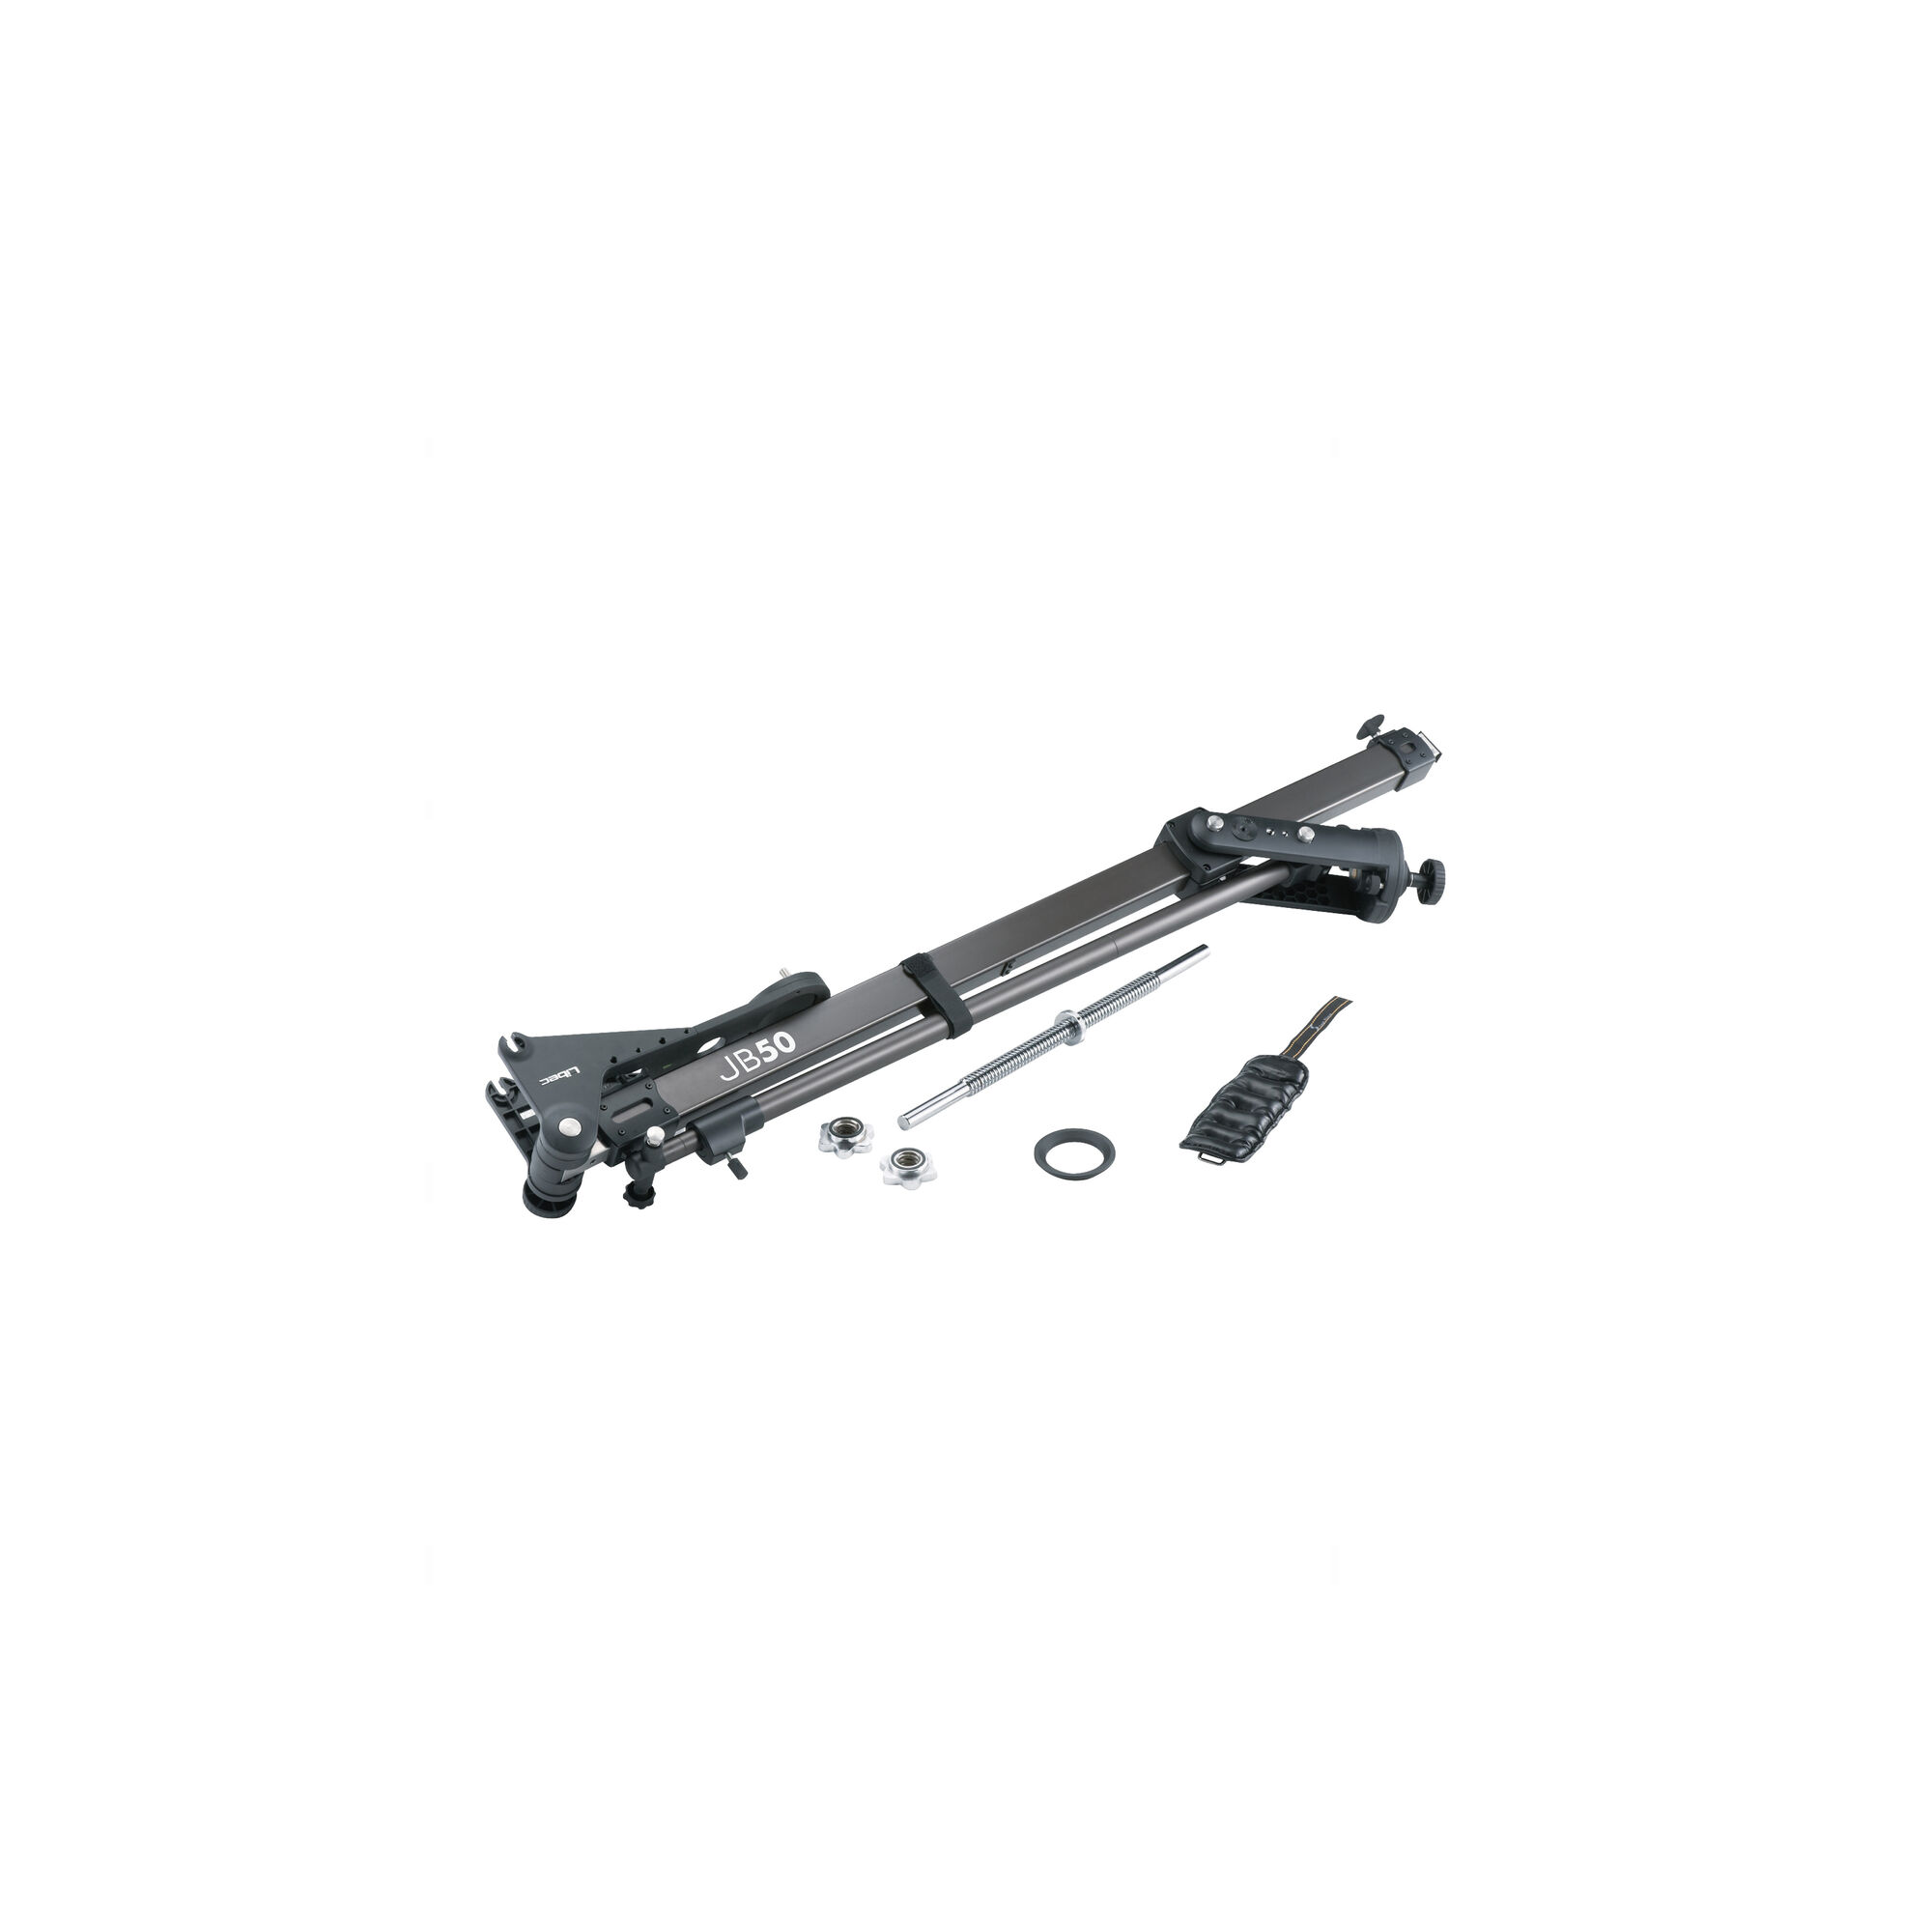 Libec Extendable jib arm with carrying case